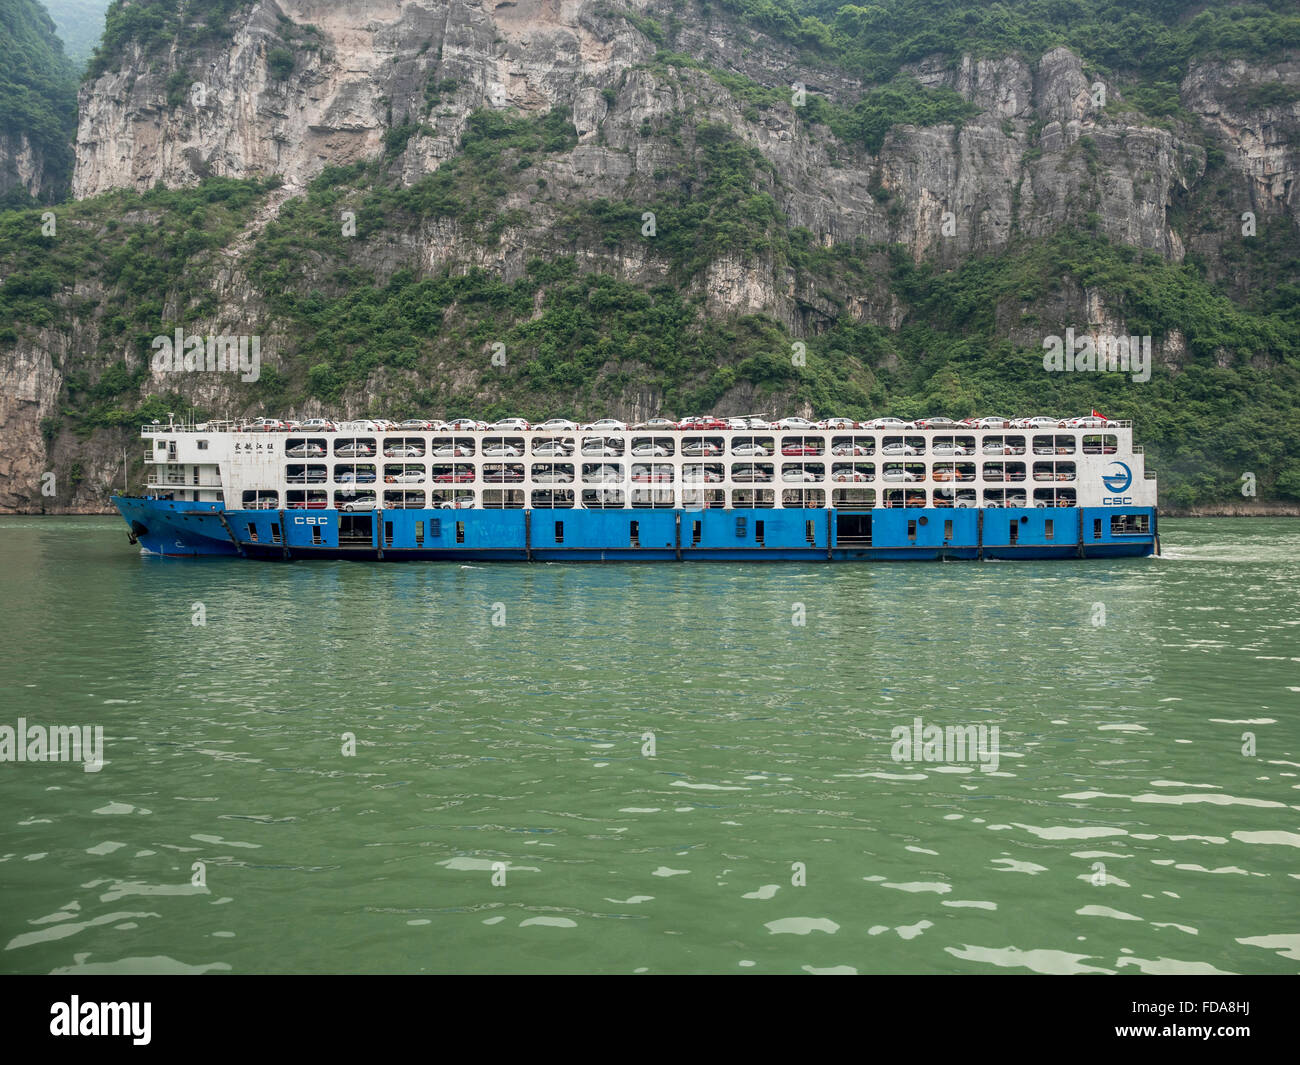 A Cargo Ship From CSC RoRo Logistics Company Limited Transporting New Cars Upstream On The Yangtze River In Hubei Province China Stock Photo